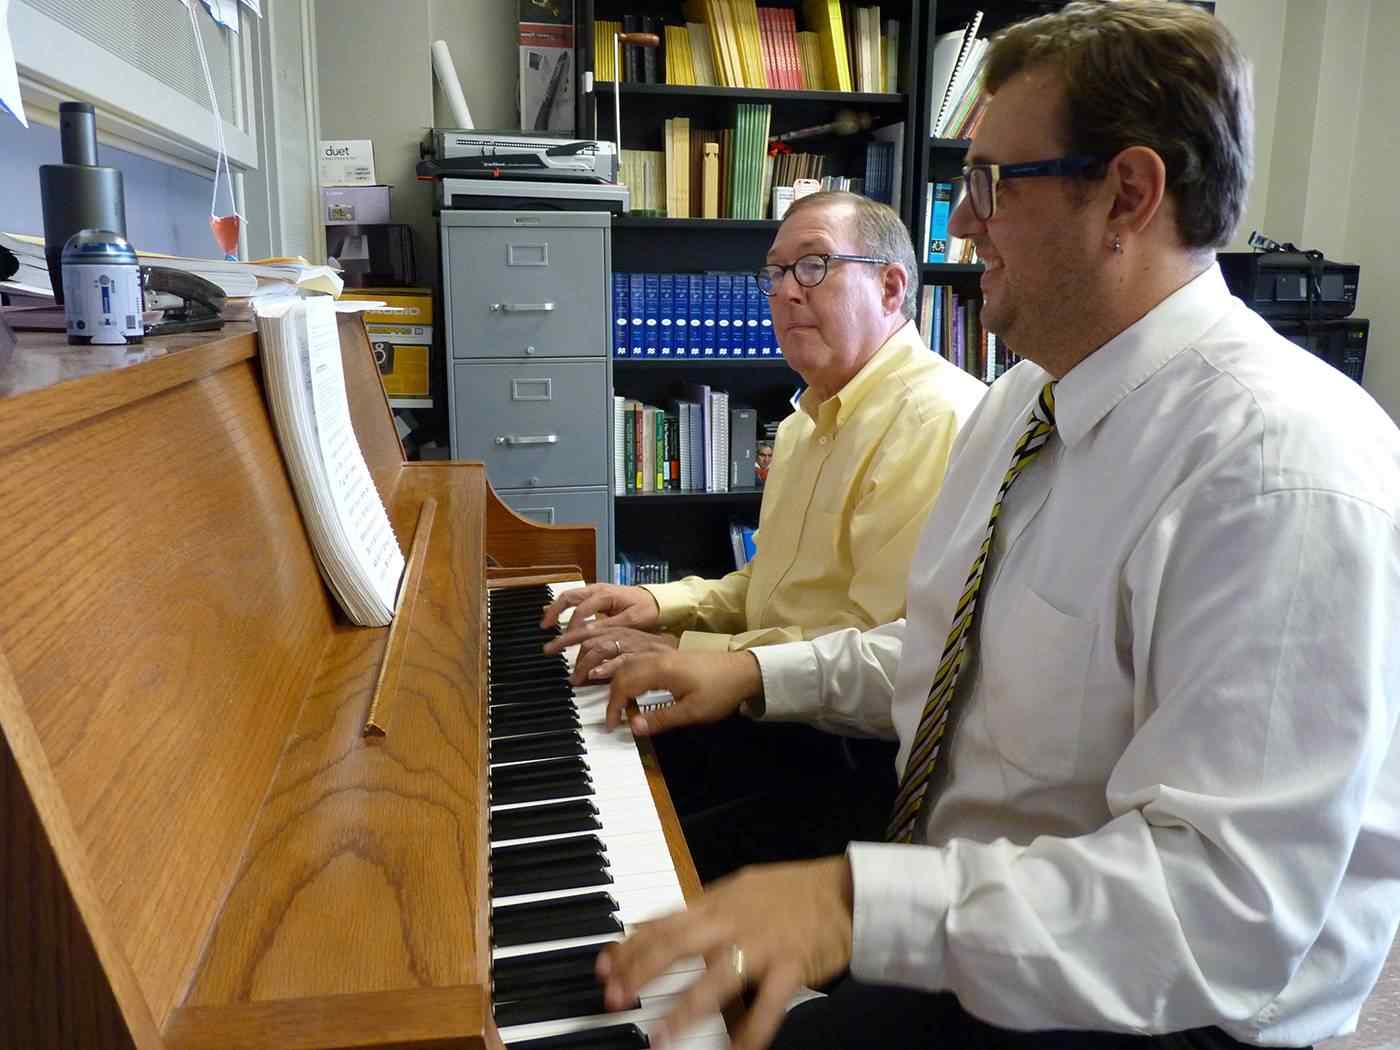 Professor teaching a student on the piano.